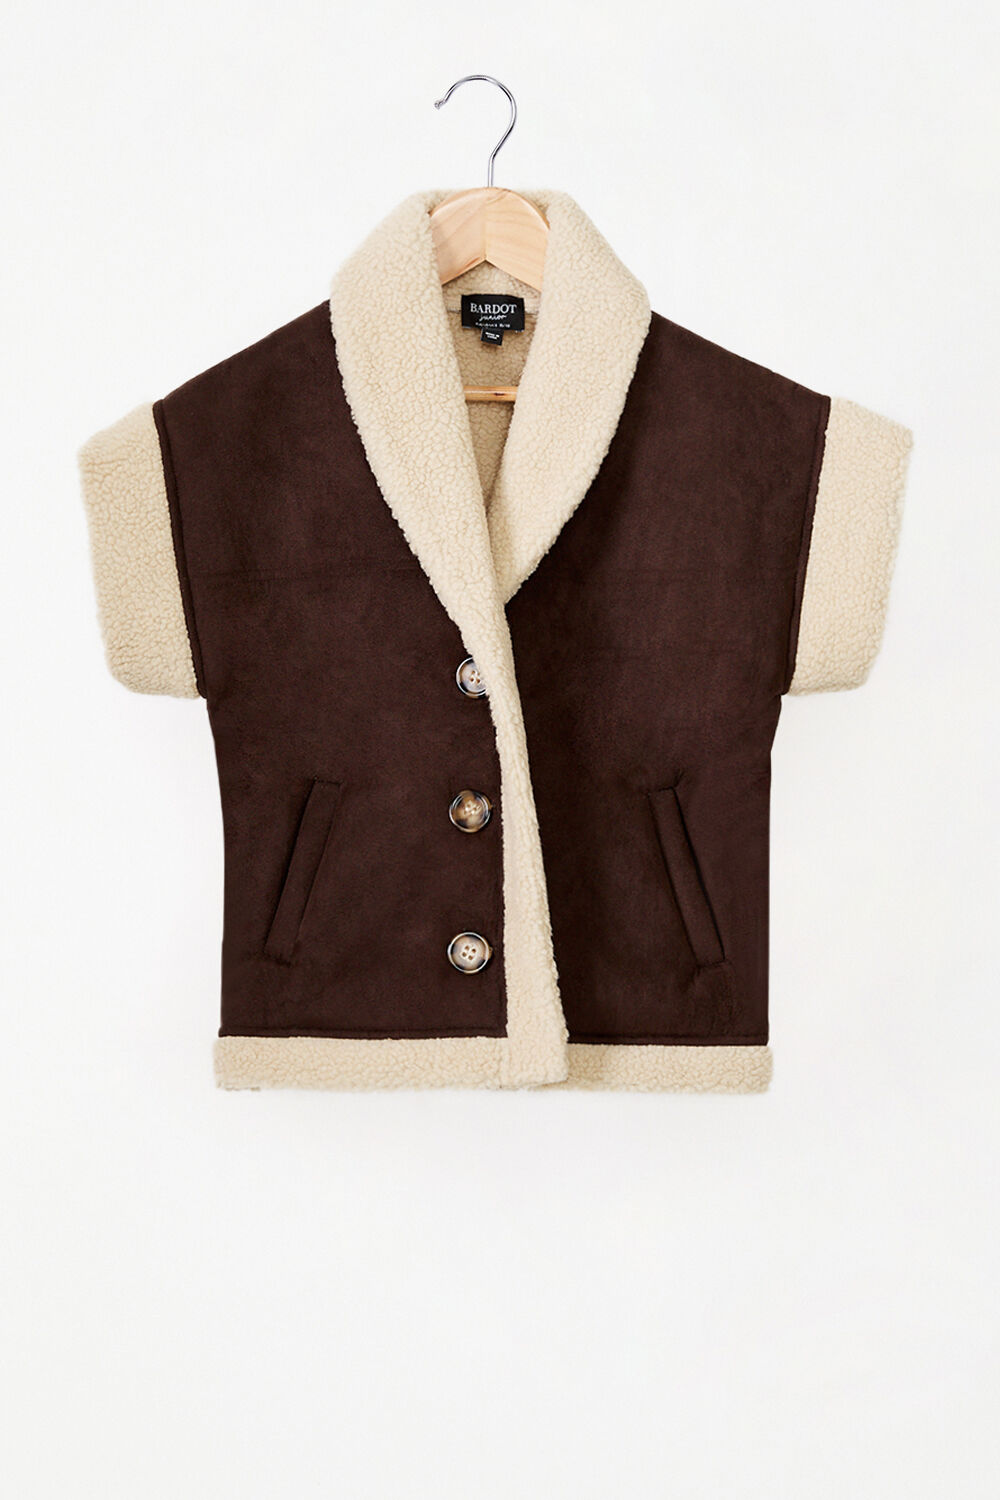 GIRLS FREYA SHEARLING VEST in colour CHOCOLATE BROWN